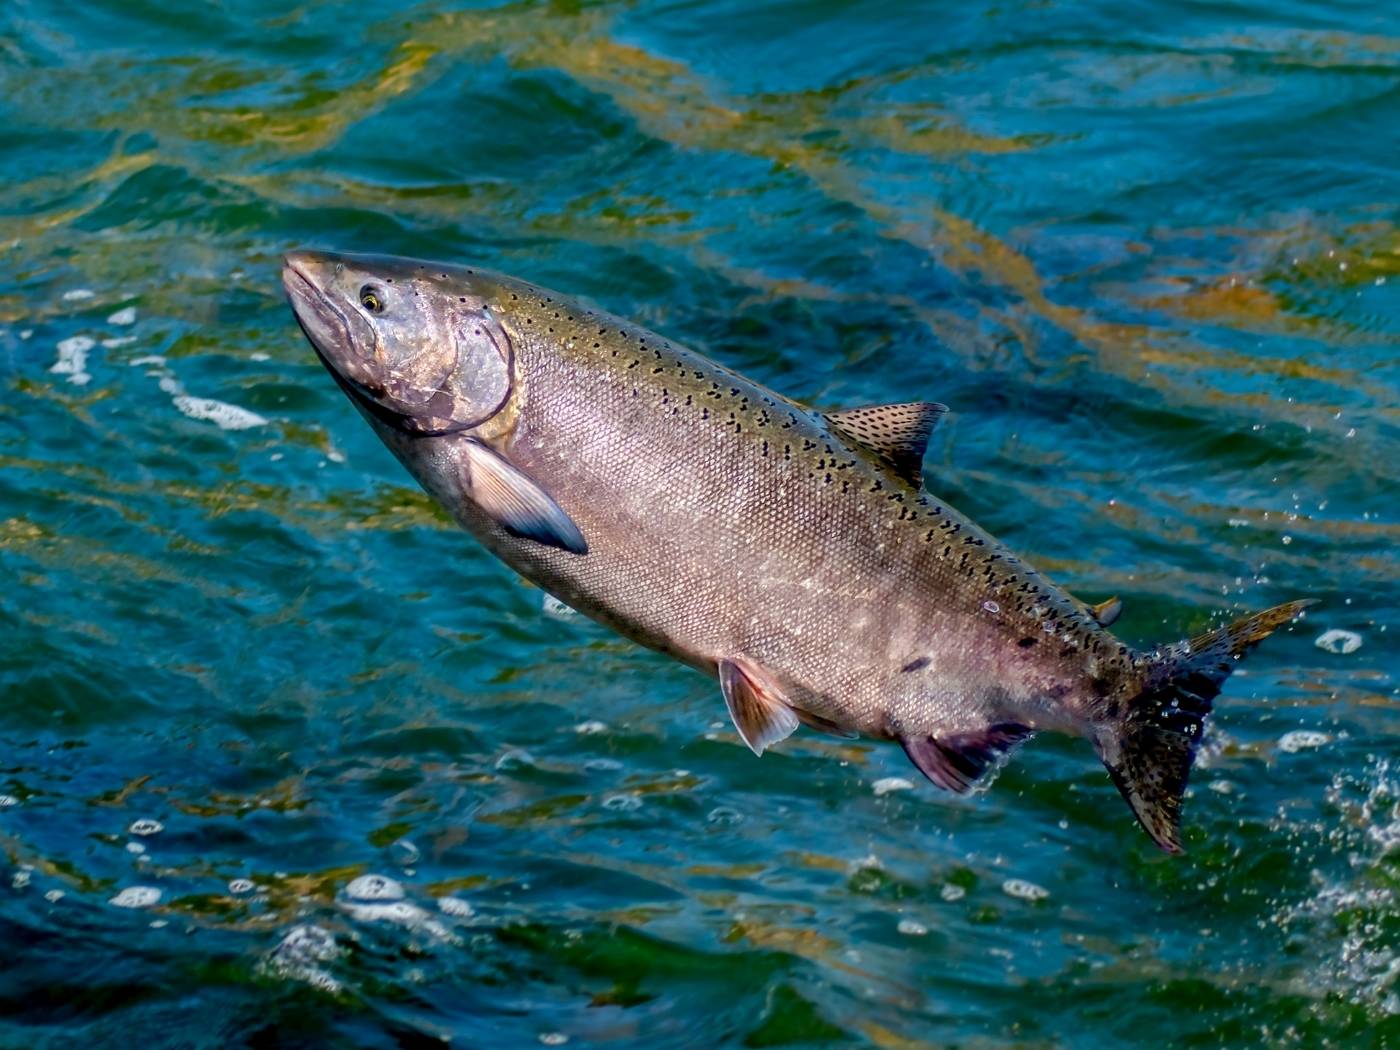 Planting Trees to Save The Salmon Fish: Why Fish Need Trees?